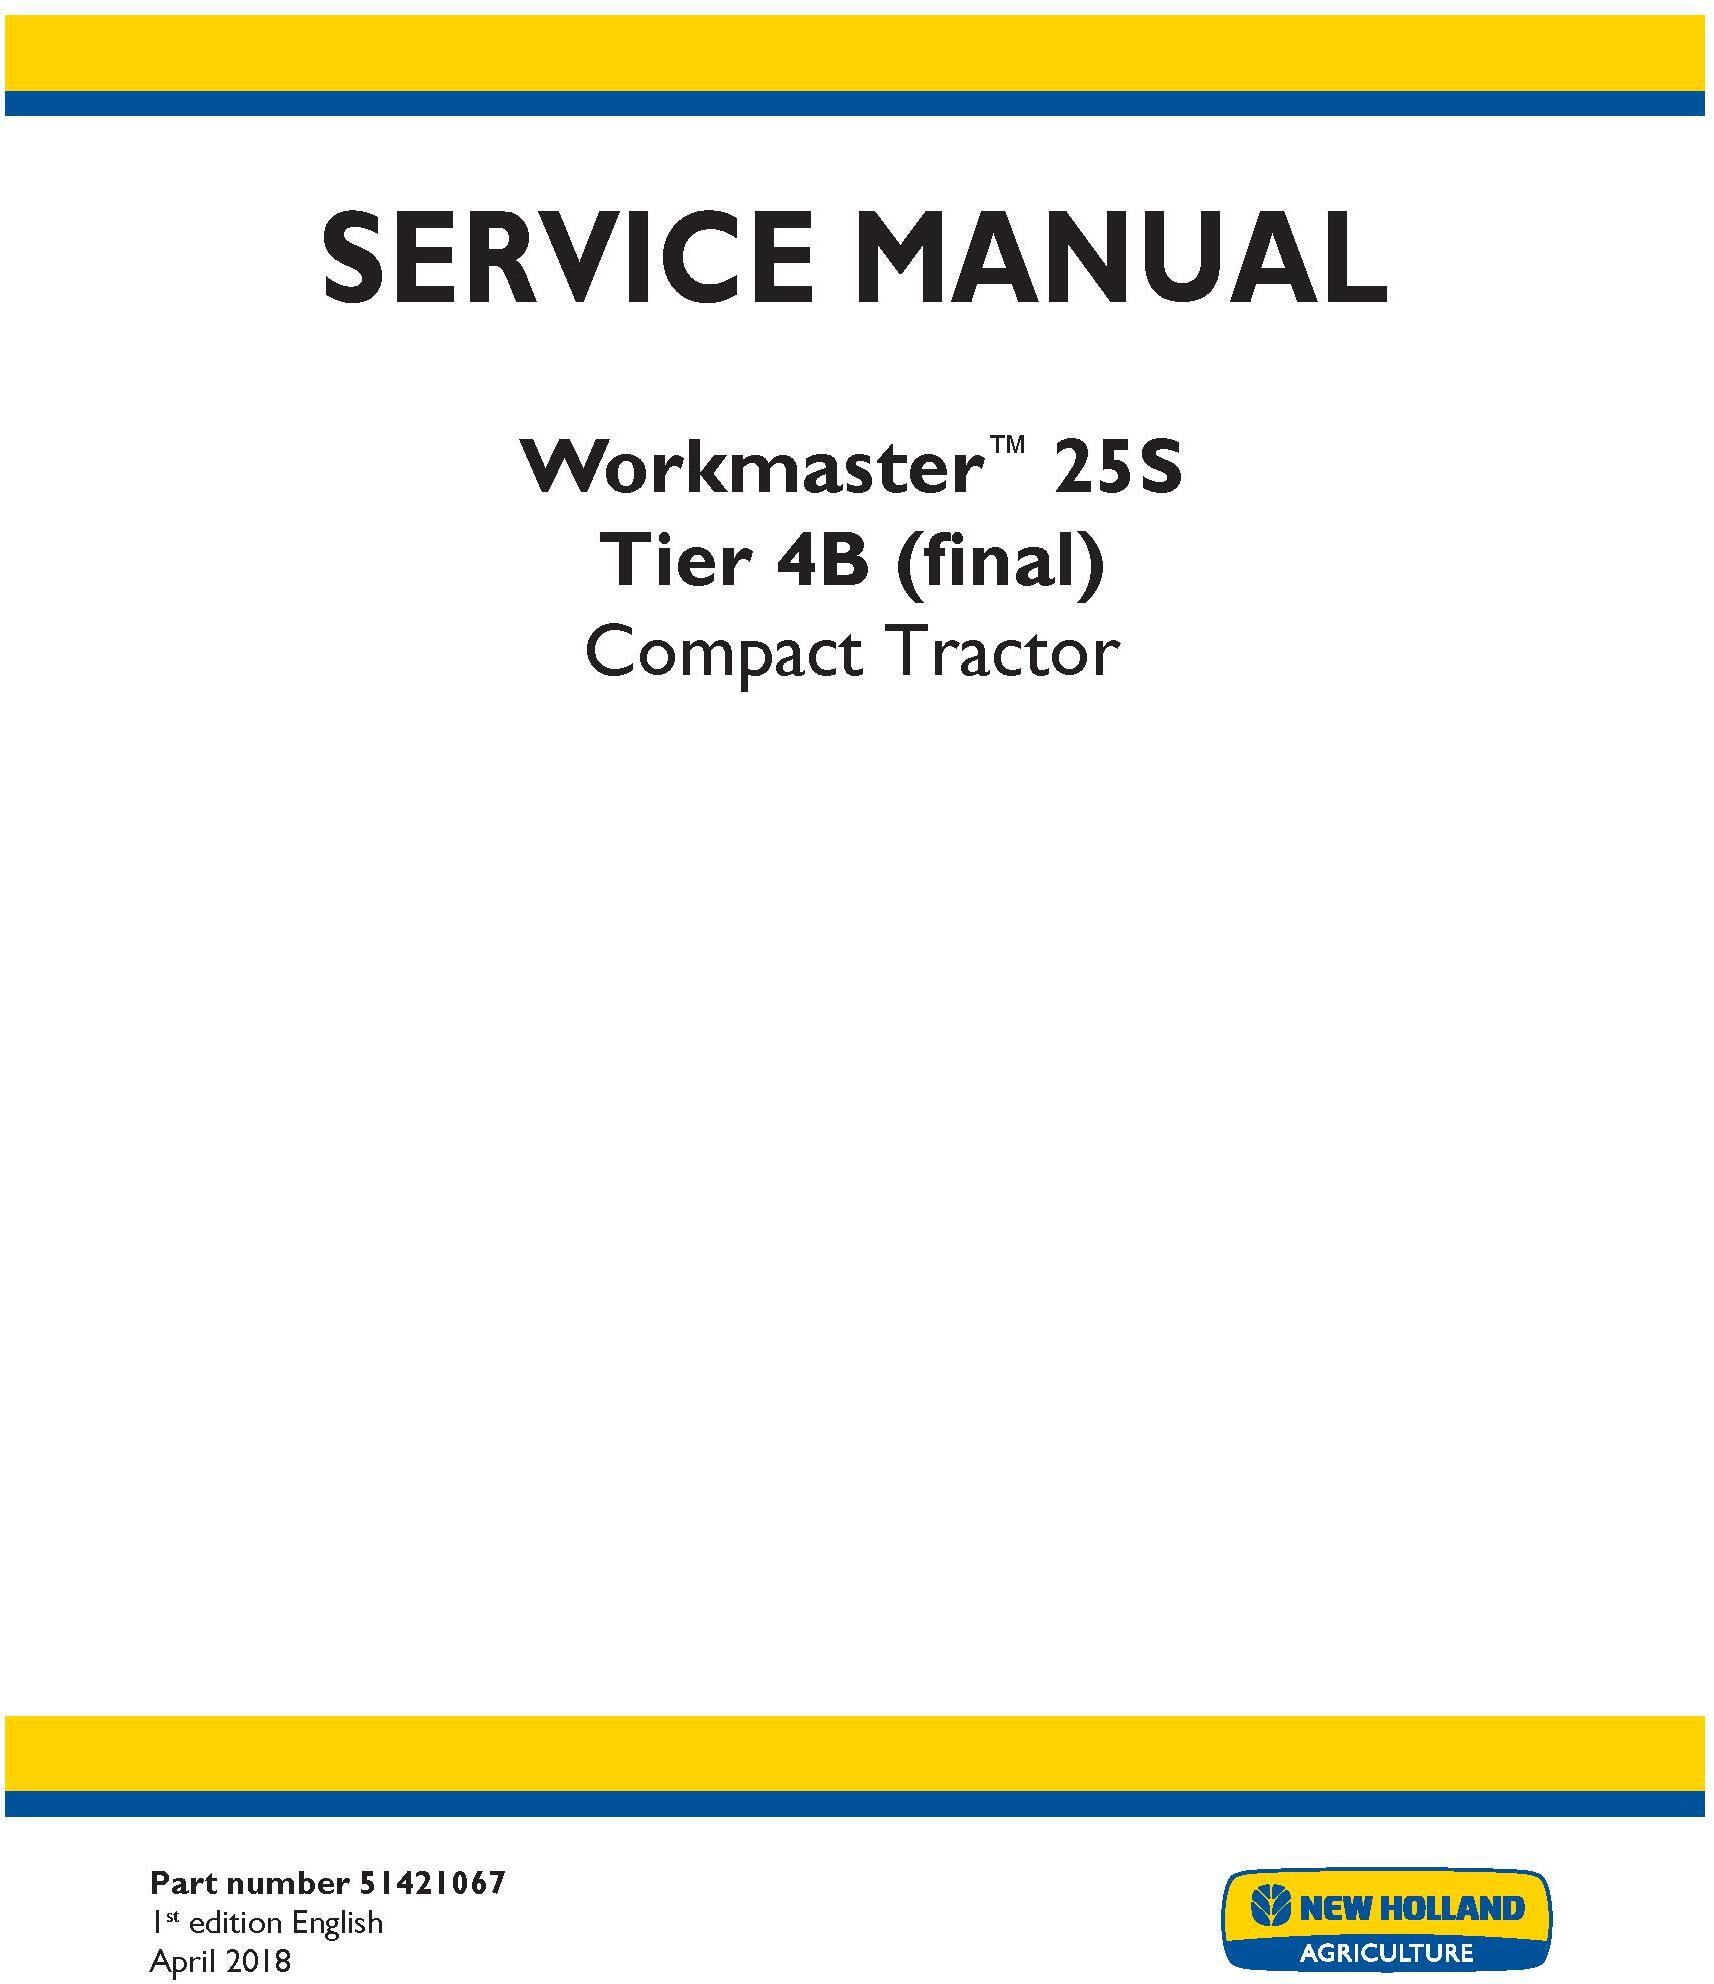 New Holland Workmaster 25S Compact Tractor, with Engine 0BTN4-EN0031, Service Manual